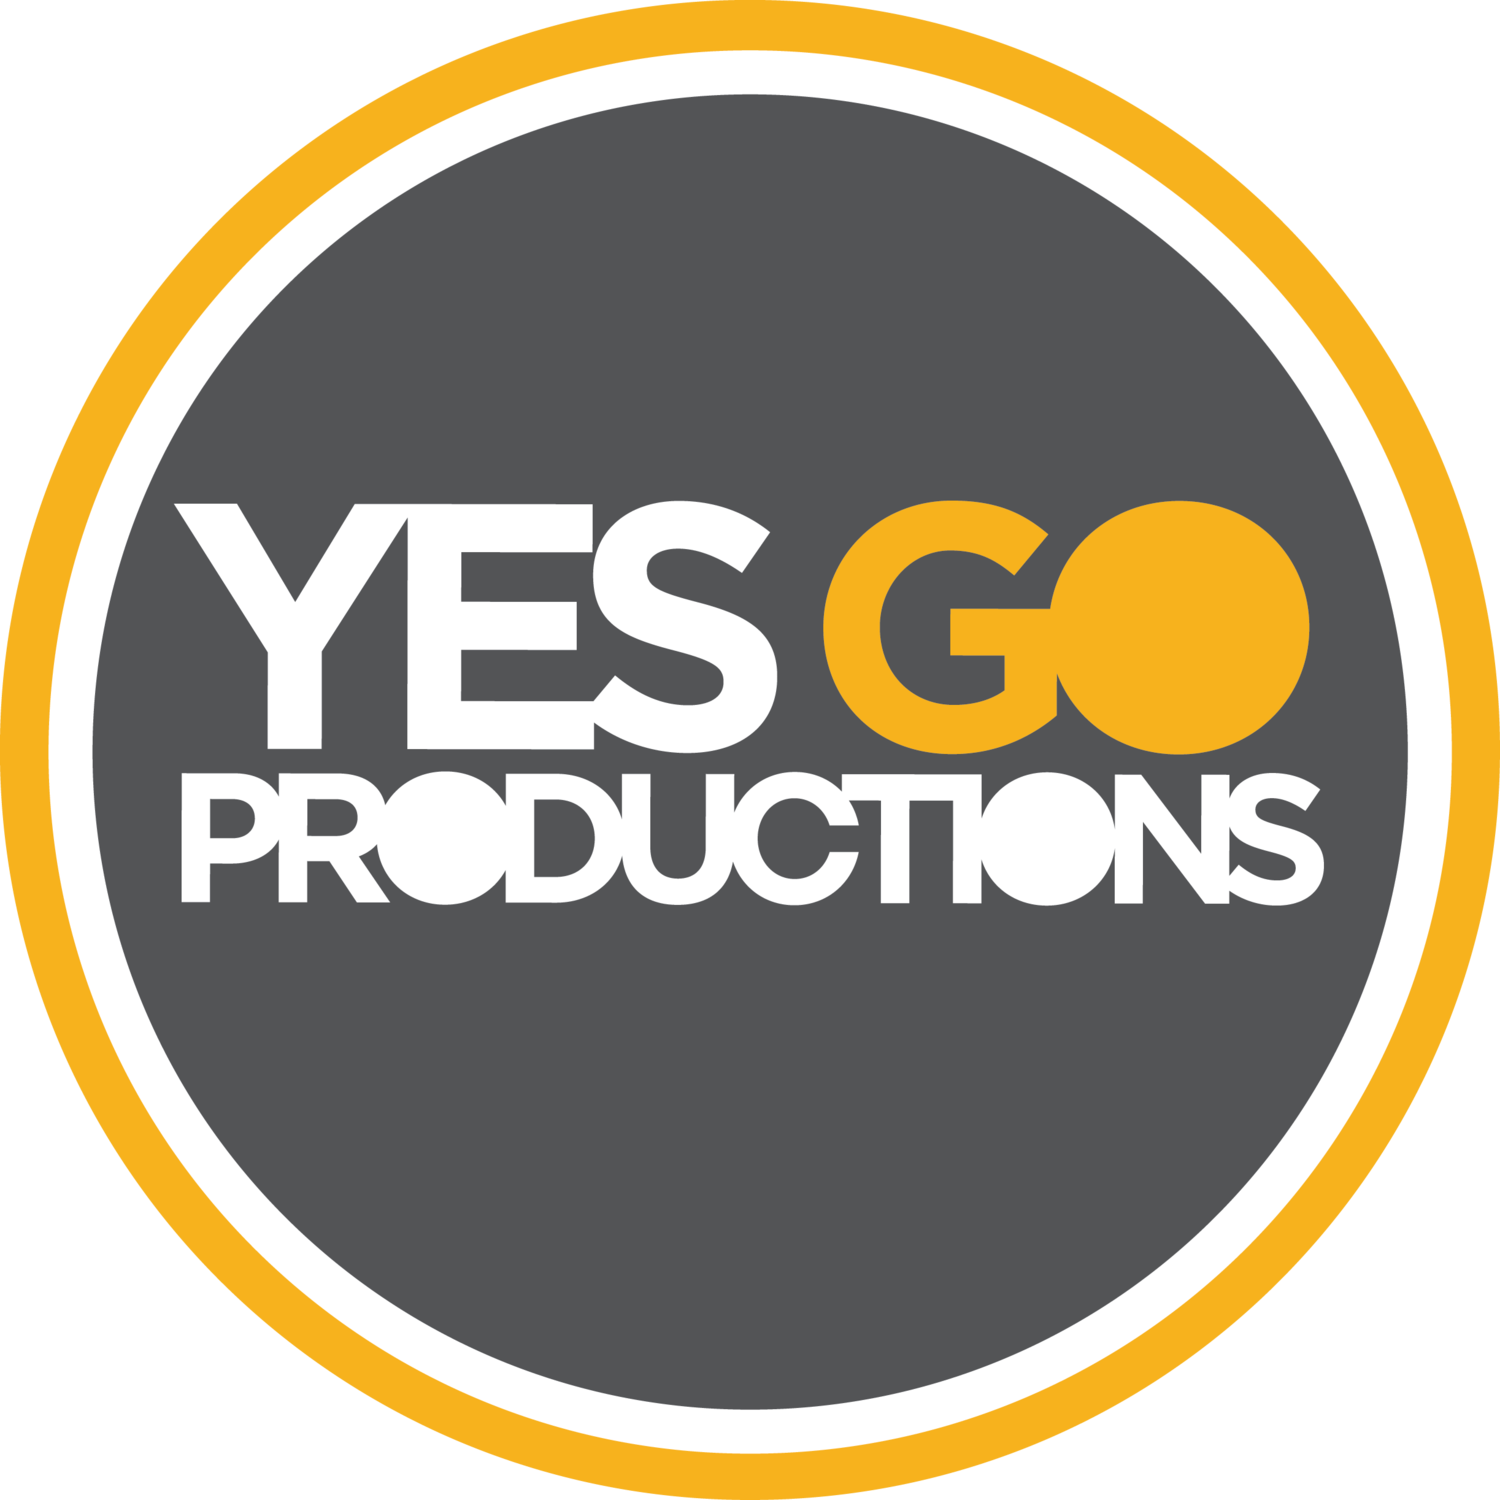 Yes Go Productions